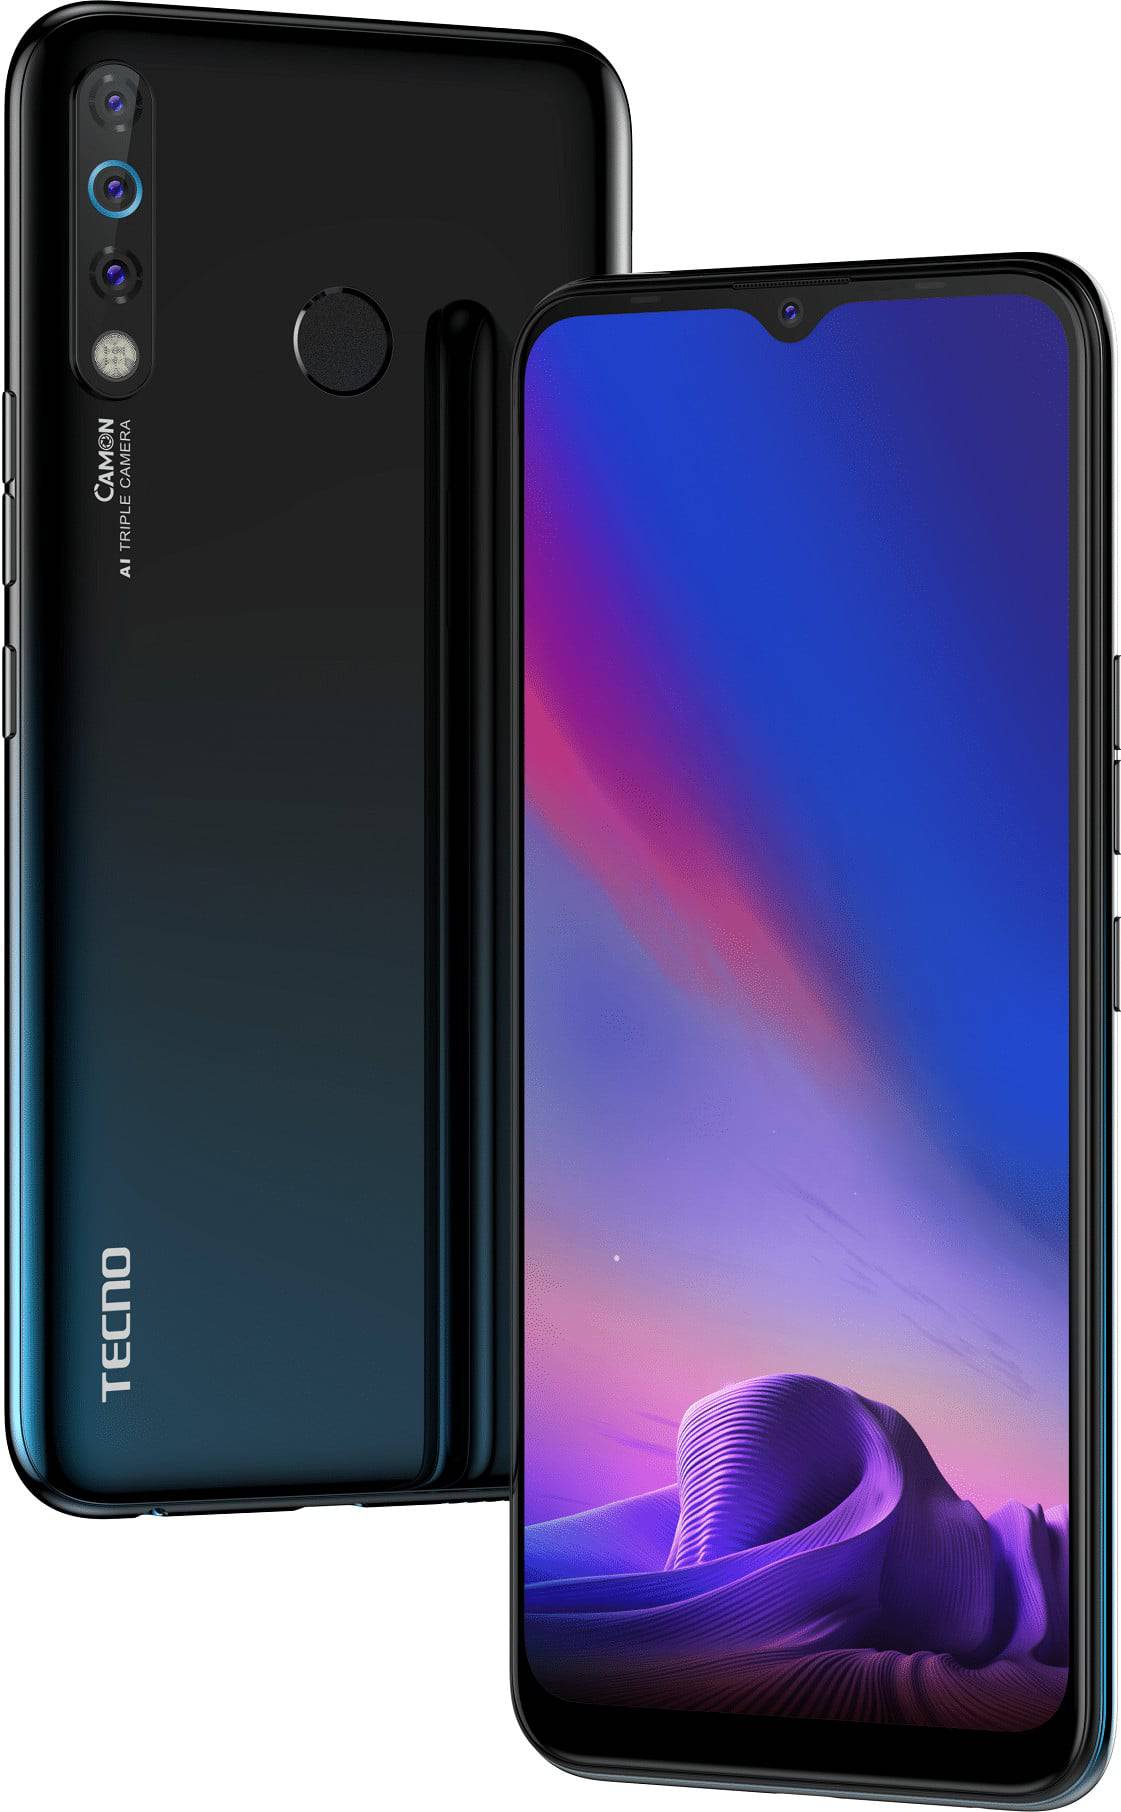 TECNO Mobile Launches New CAMON 12 in the UAE